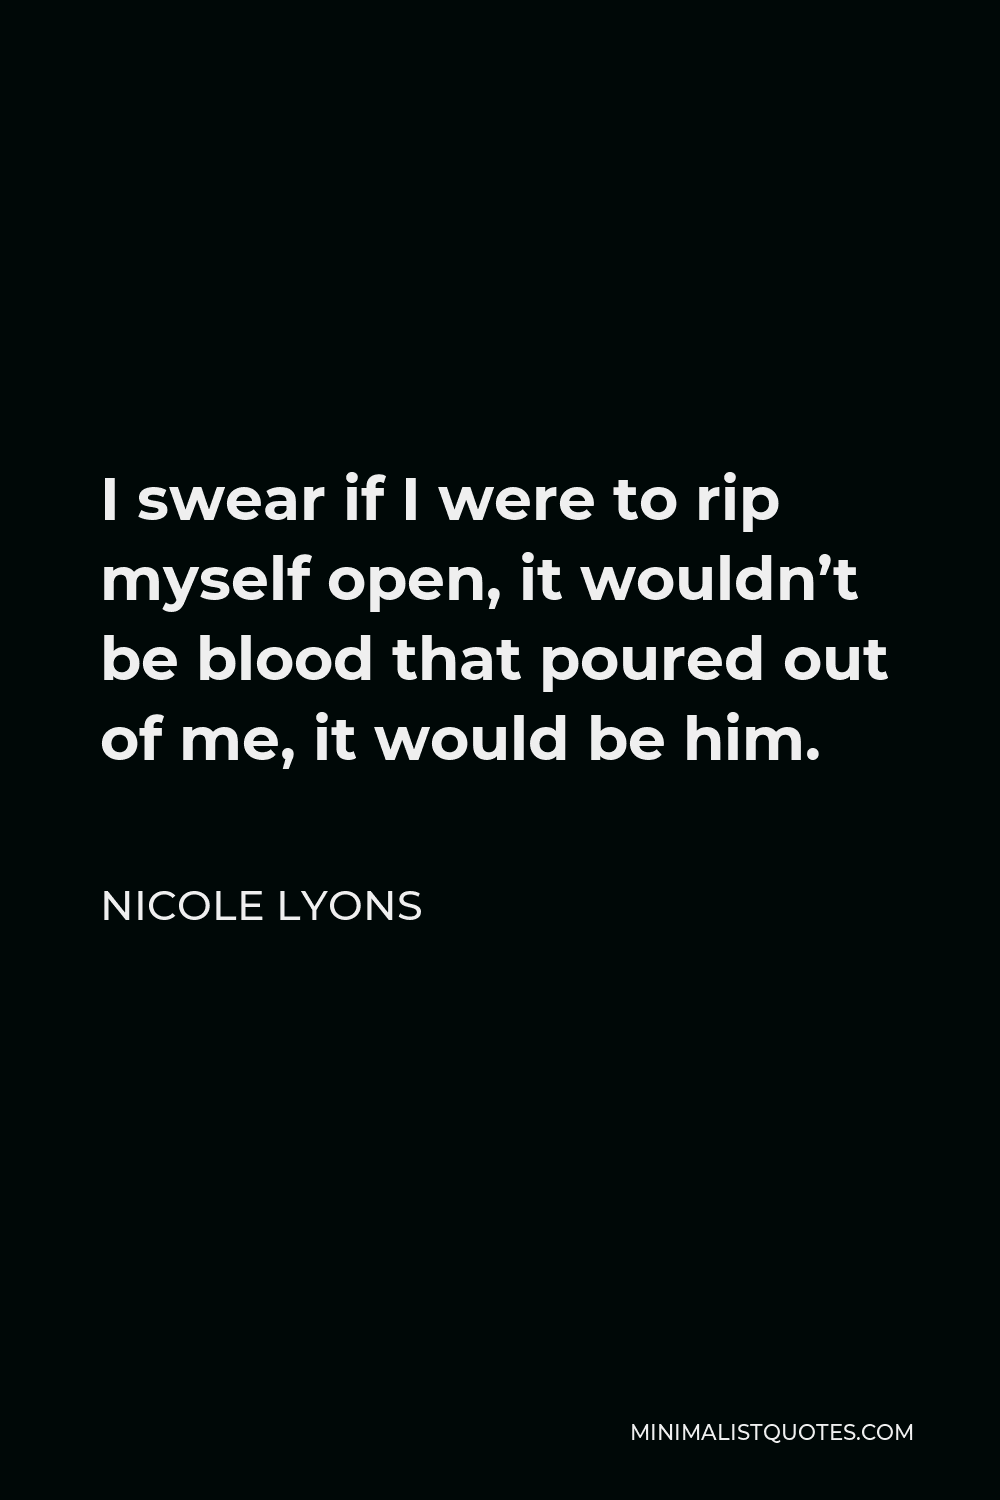 Nicole Lyons Quote - I swear if I were to rip myself open, it wouldn’t be blood that poured out of me, it would be him.